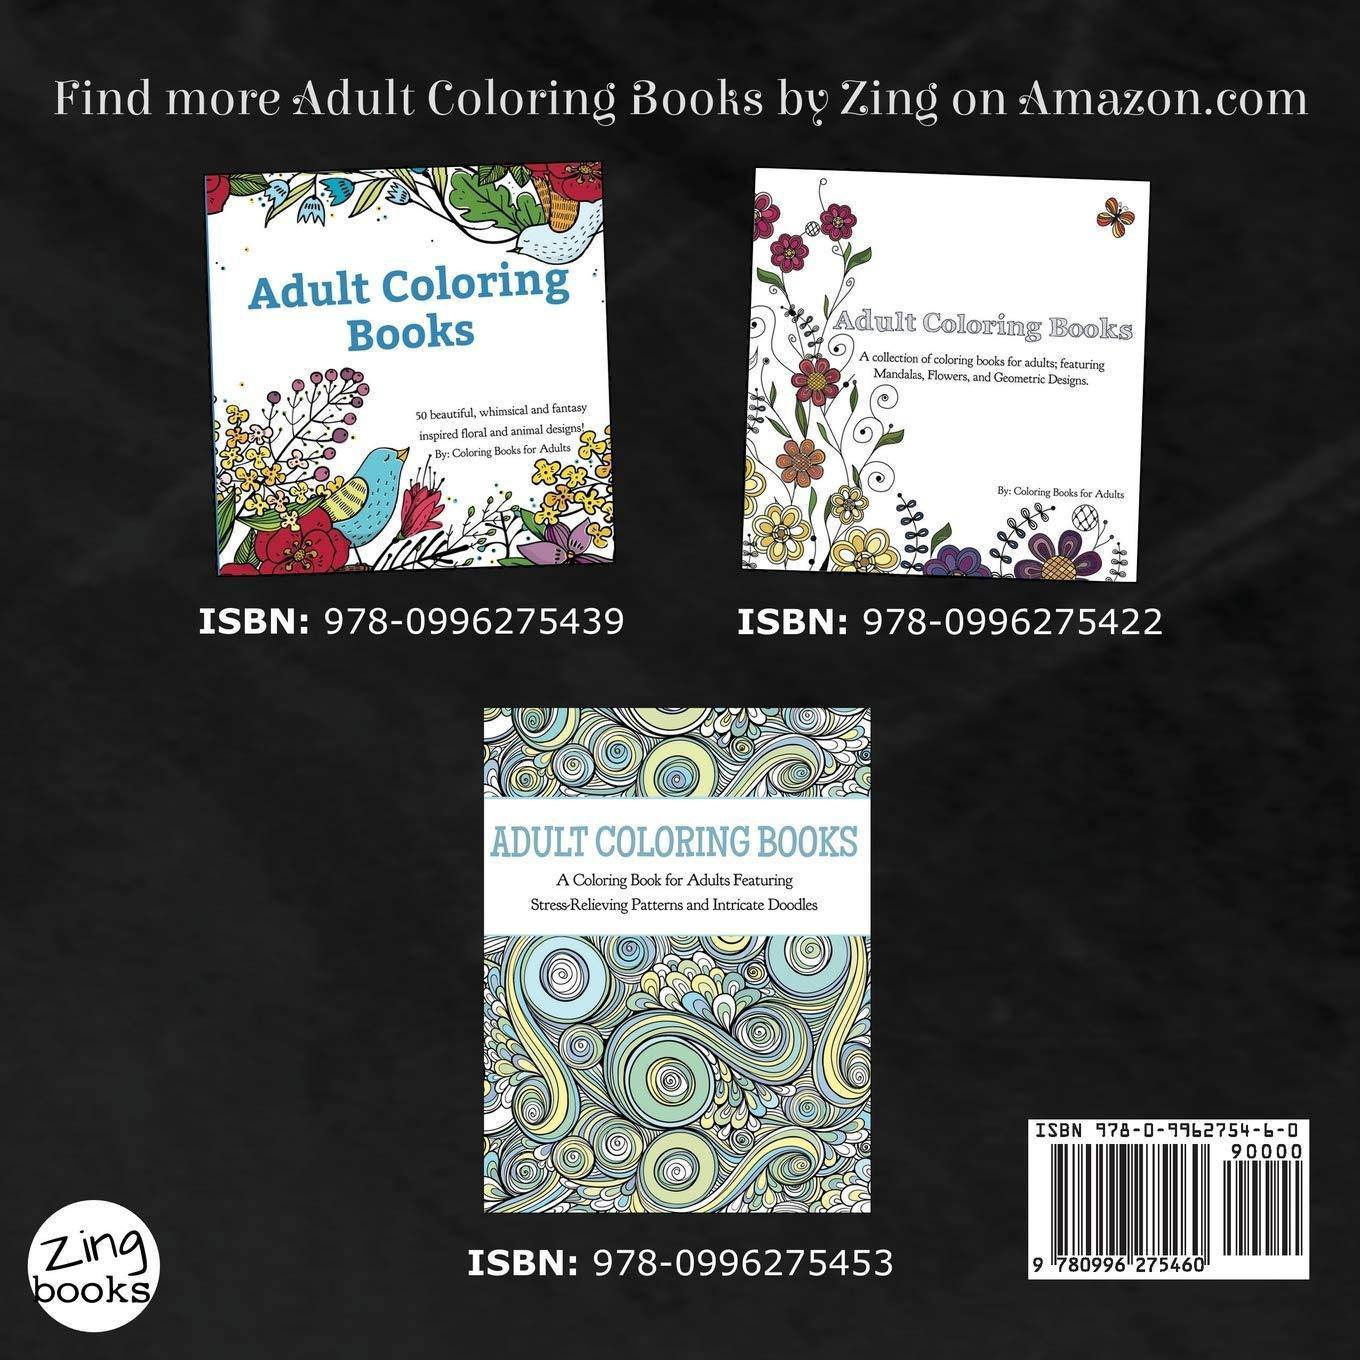 Adult Coloring Books: A Coloring Book for Adults Featuring Manda - SureShot Books Publishing LLC